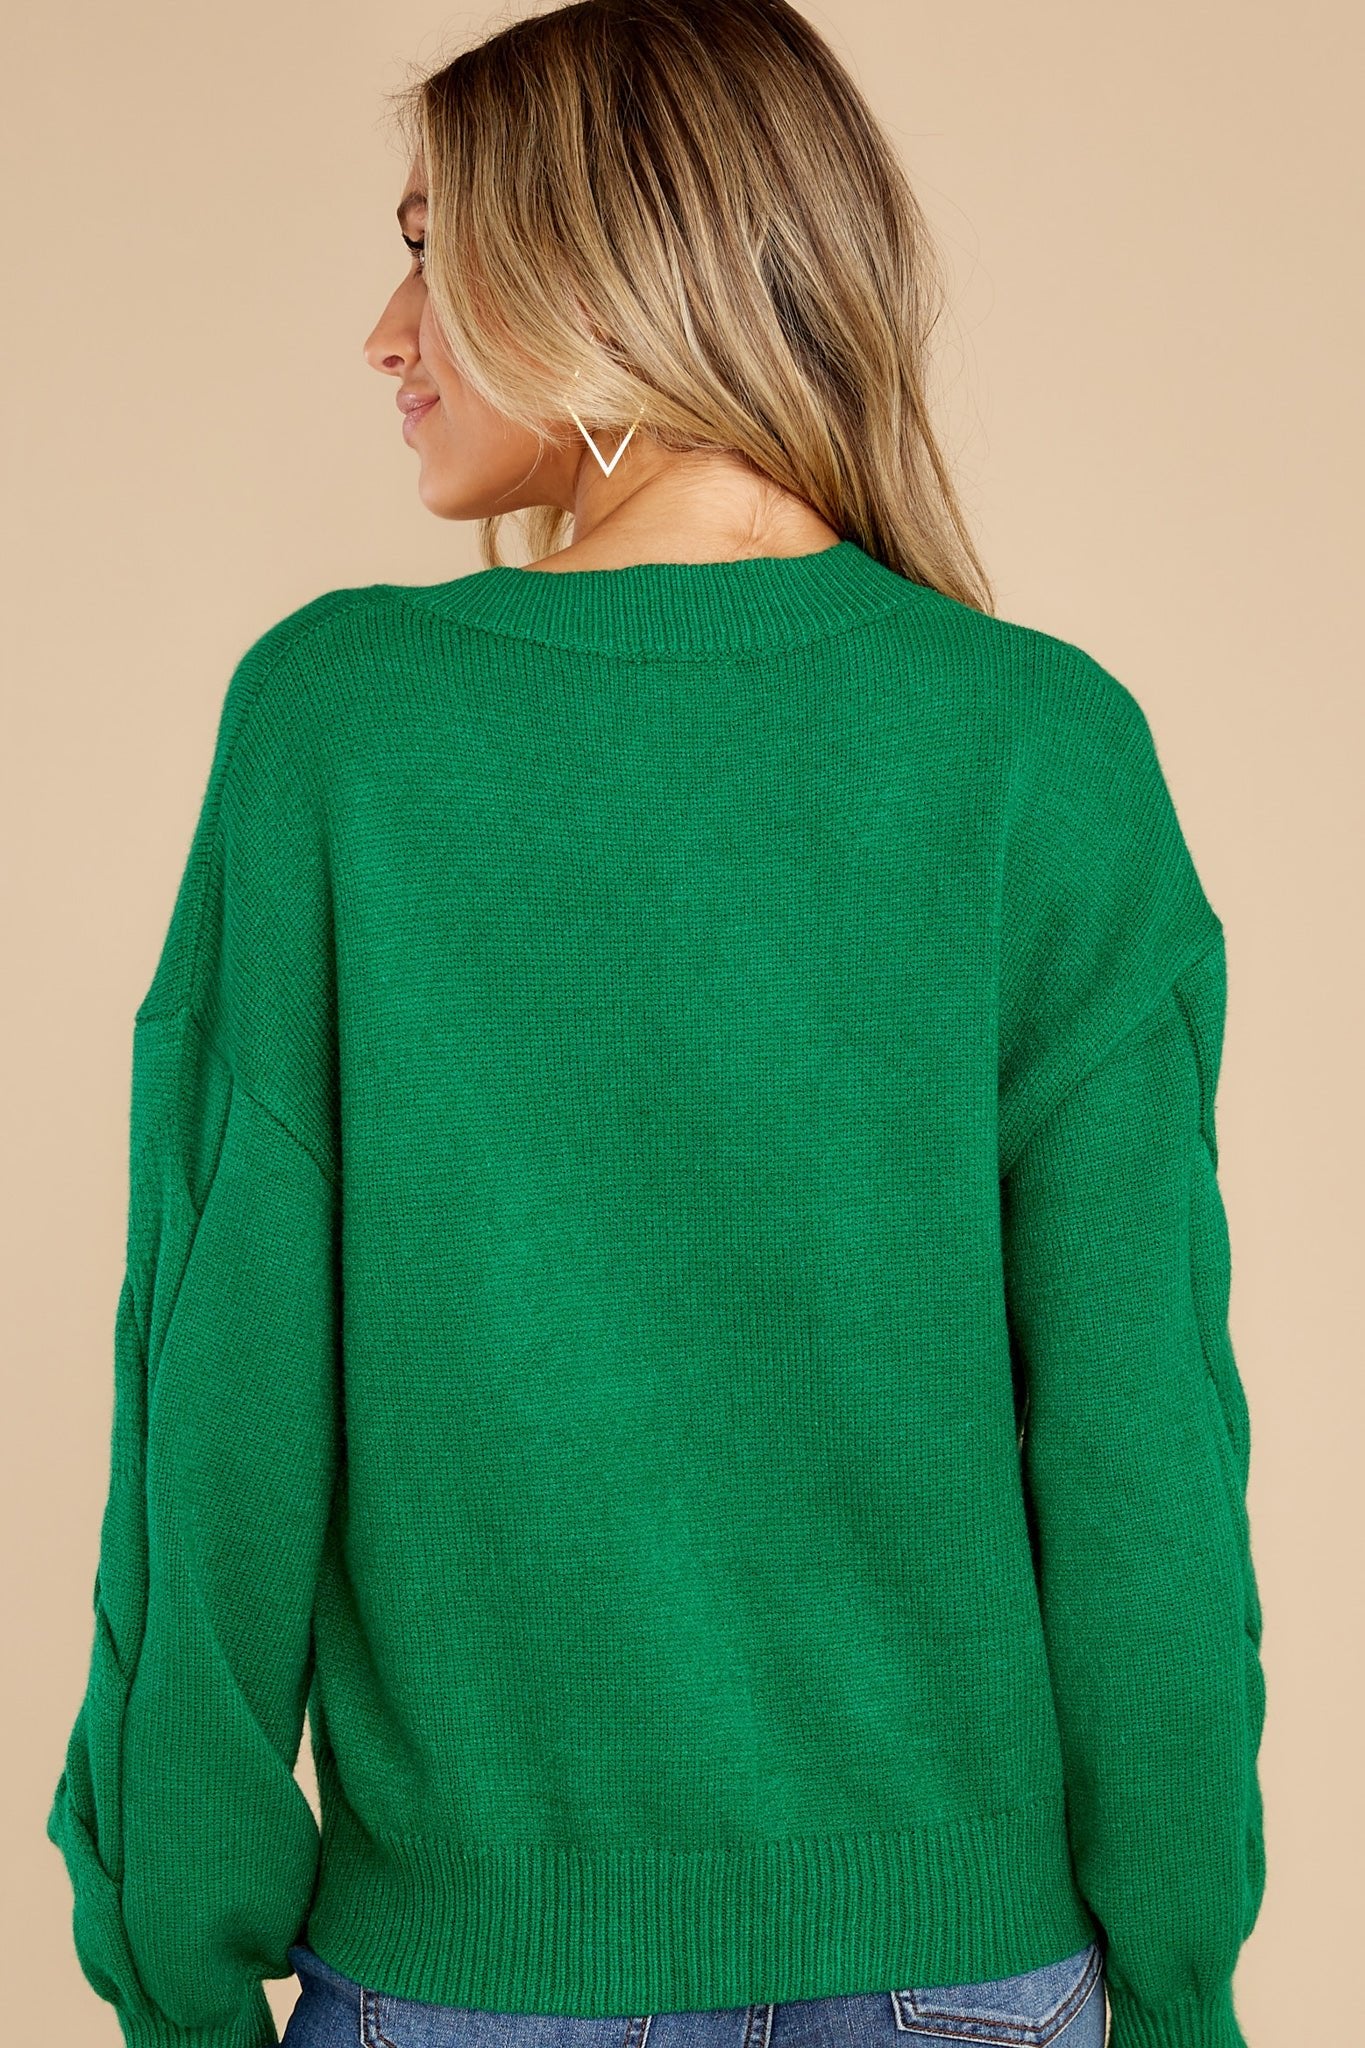 Bright Days Ahead Green Sweater - Red Dress